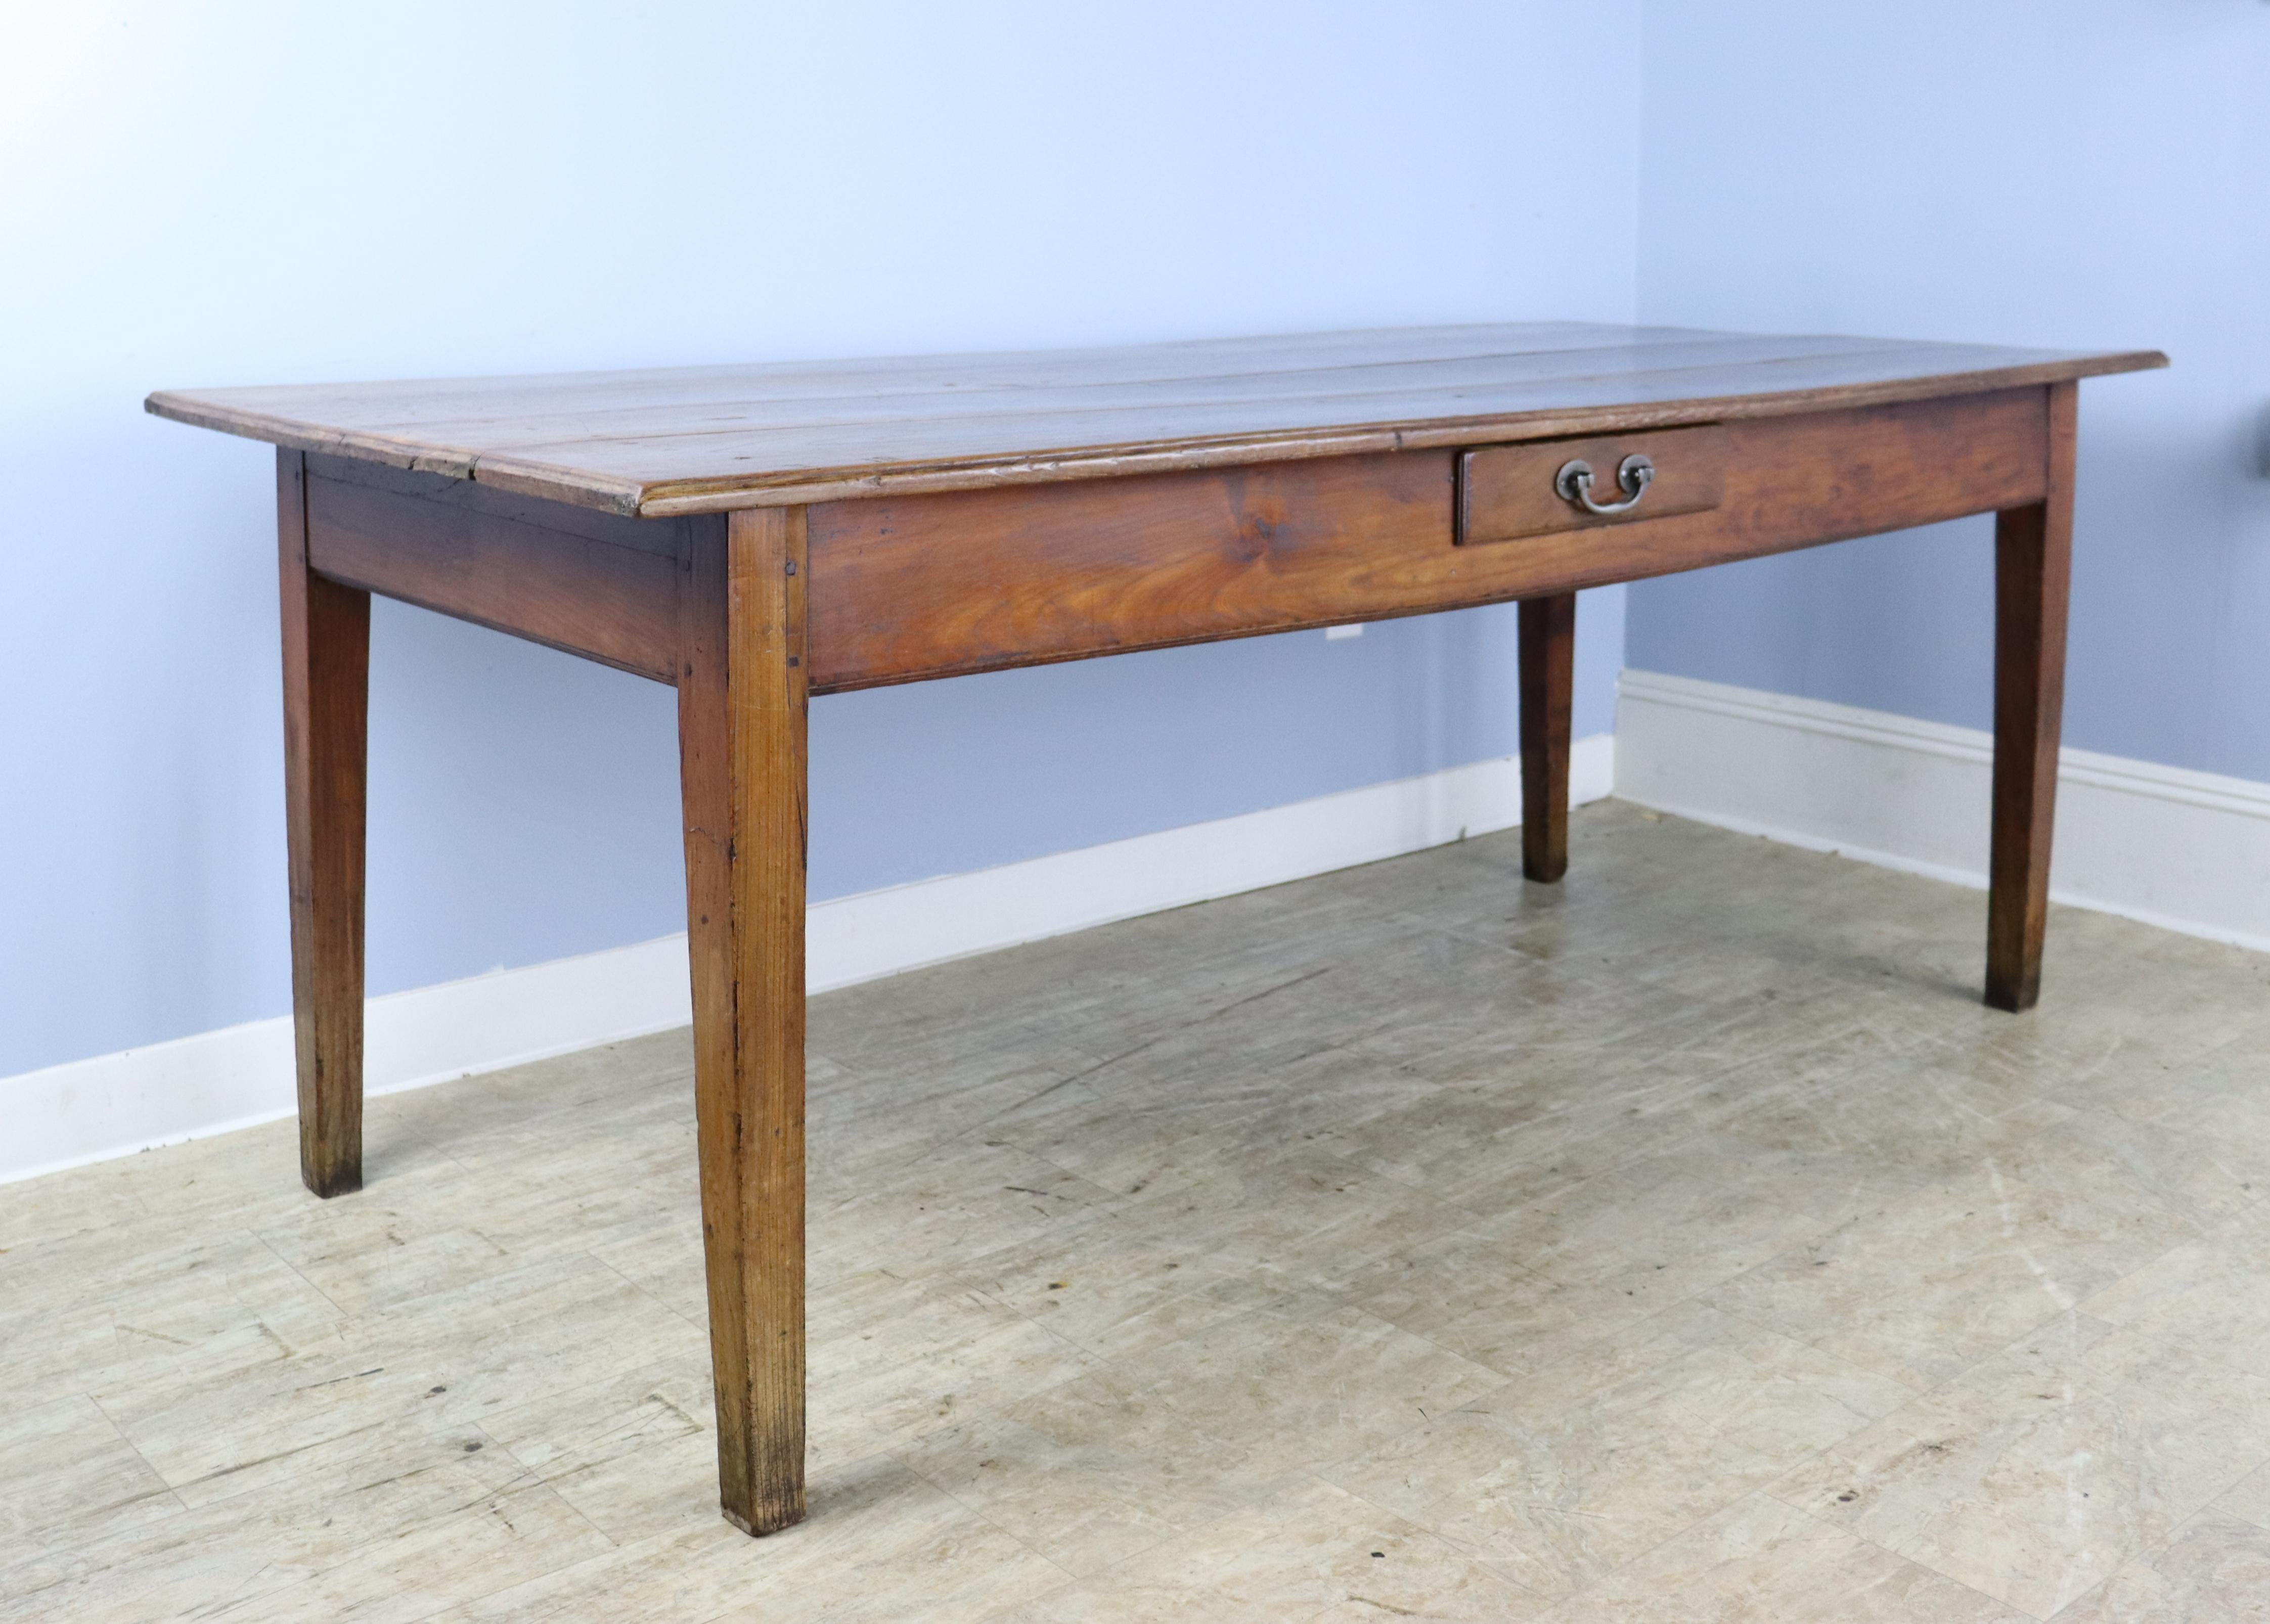 A farm or dining table with a wonderfully grained and colored top. The small beveled edge on the top, along with the single drawer mid-apron, give this table real character. There is slight wear on the top, shown in thumbnails. There are 67 inches